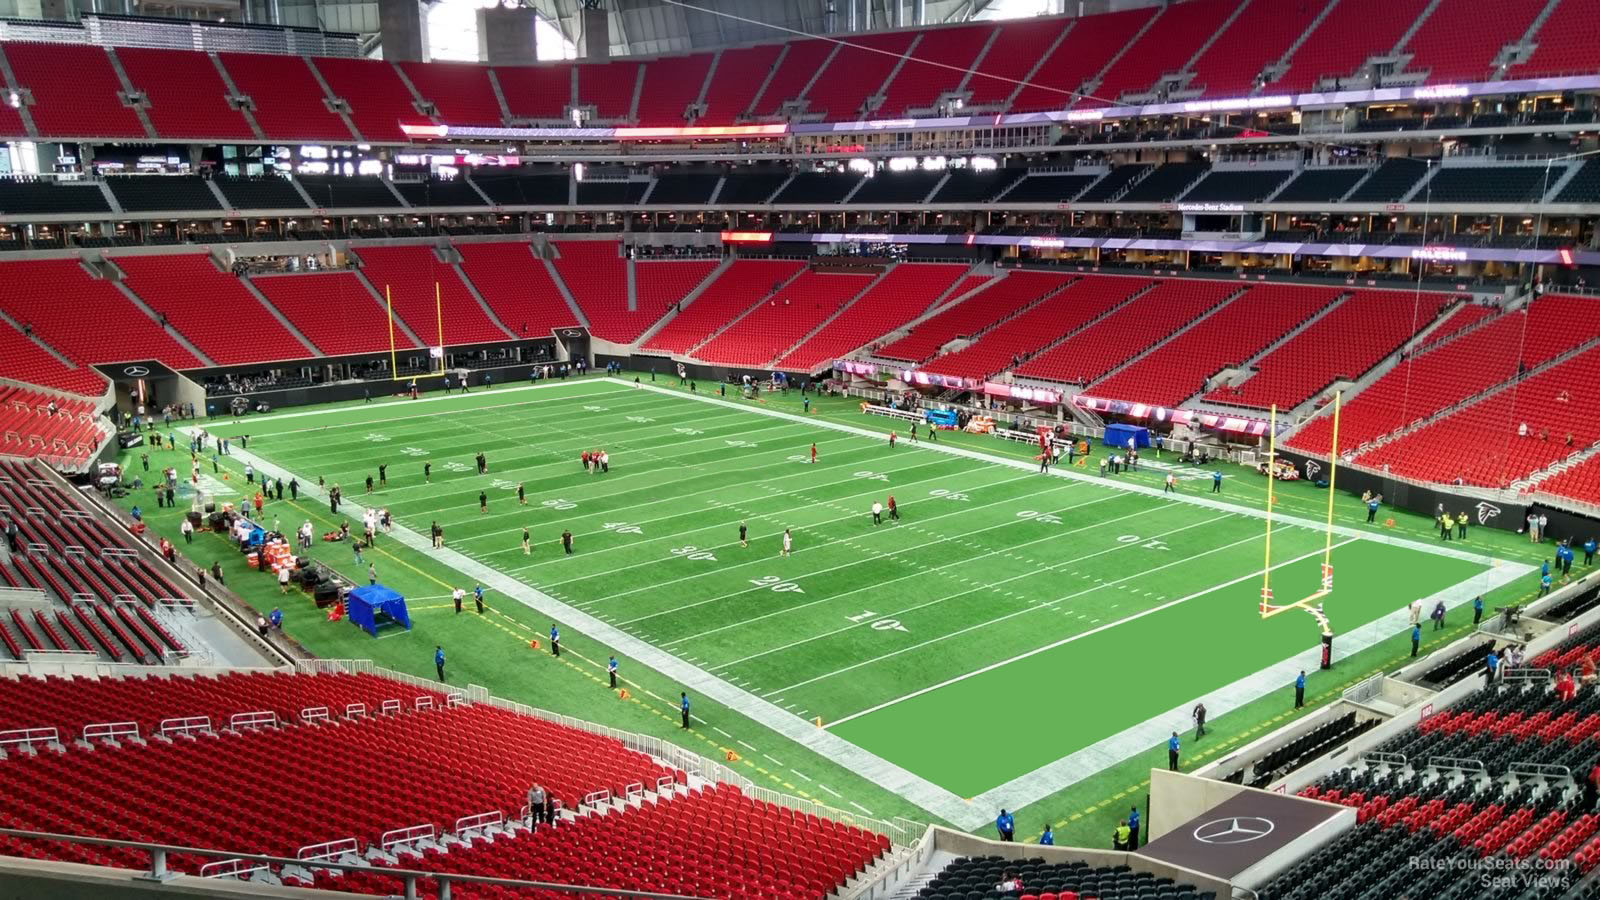 section 203, row 6 seat view  for football - mercedes-benz stadium